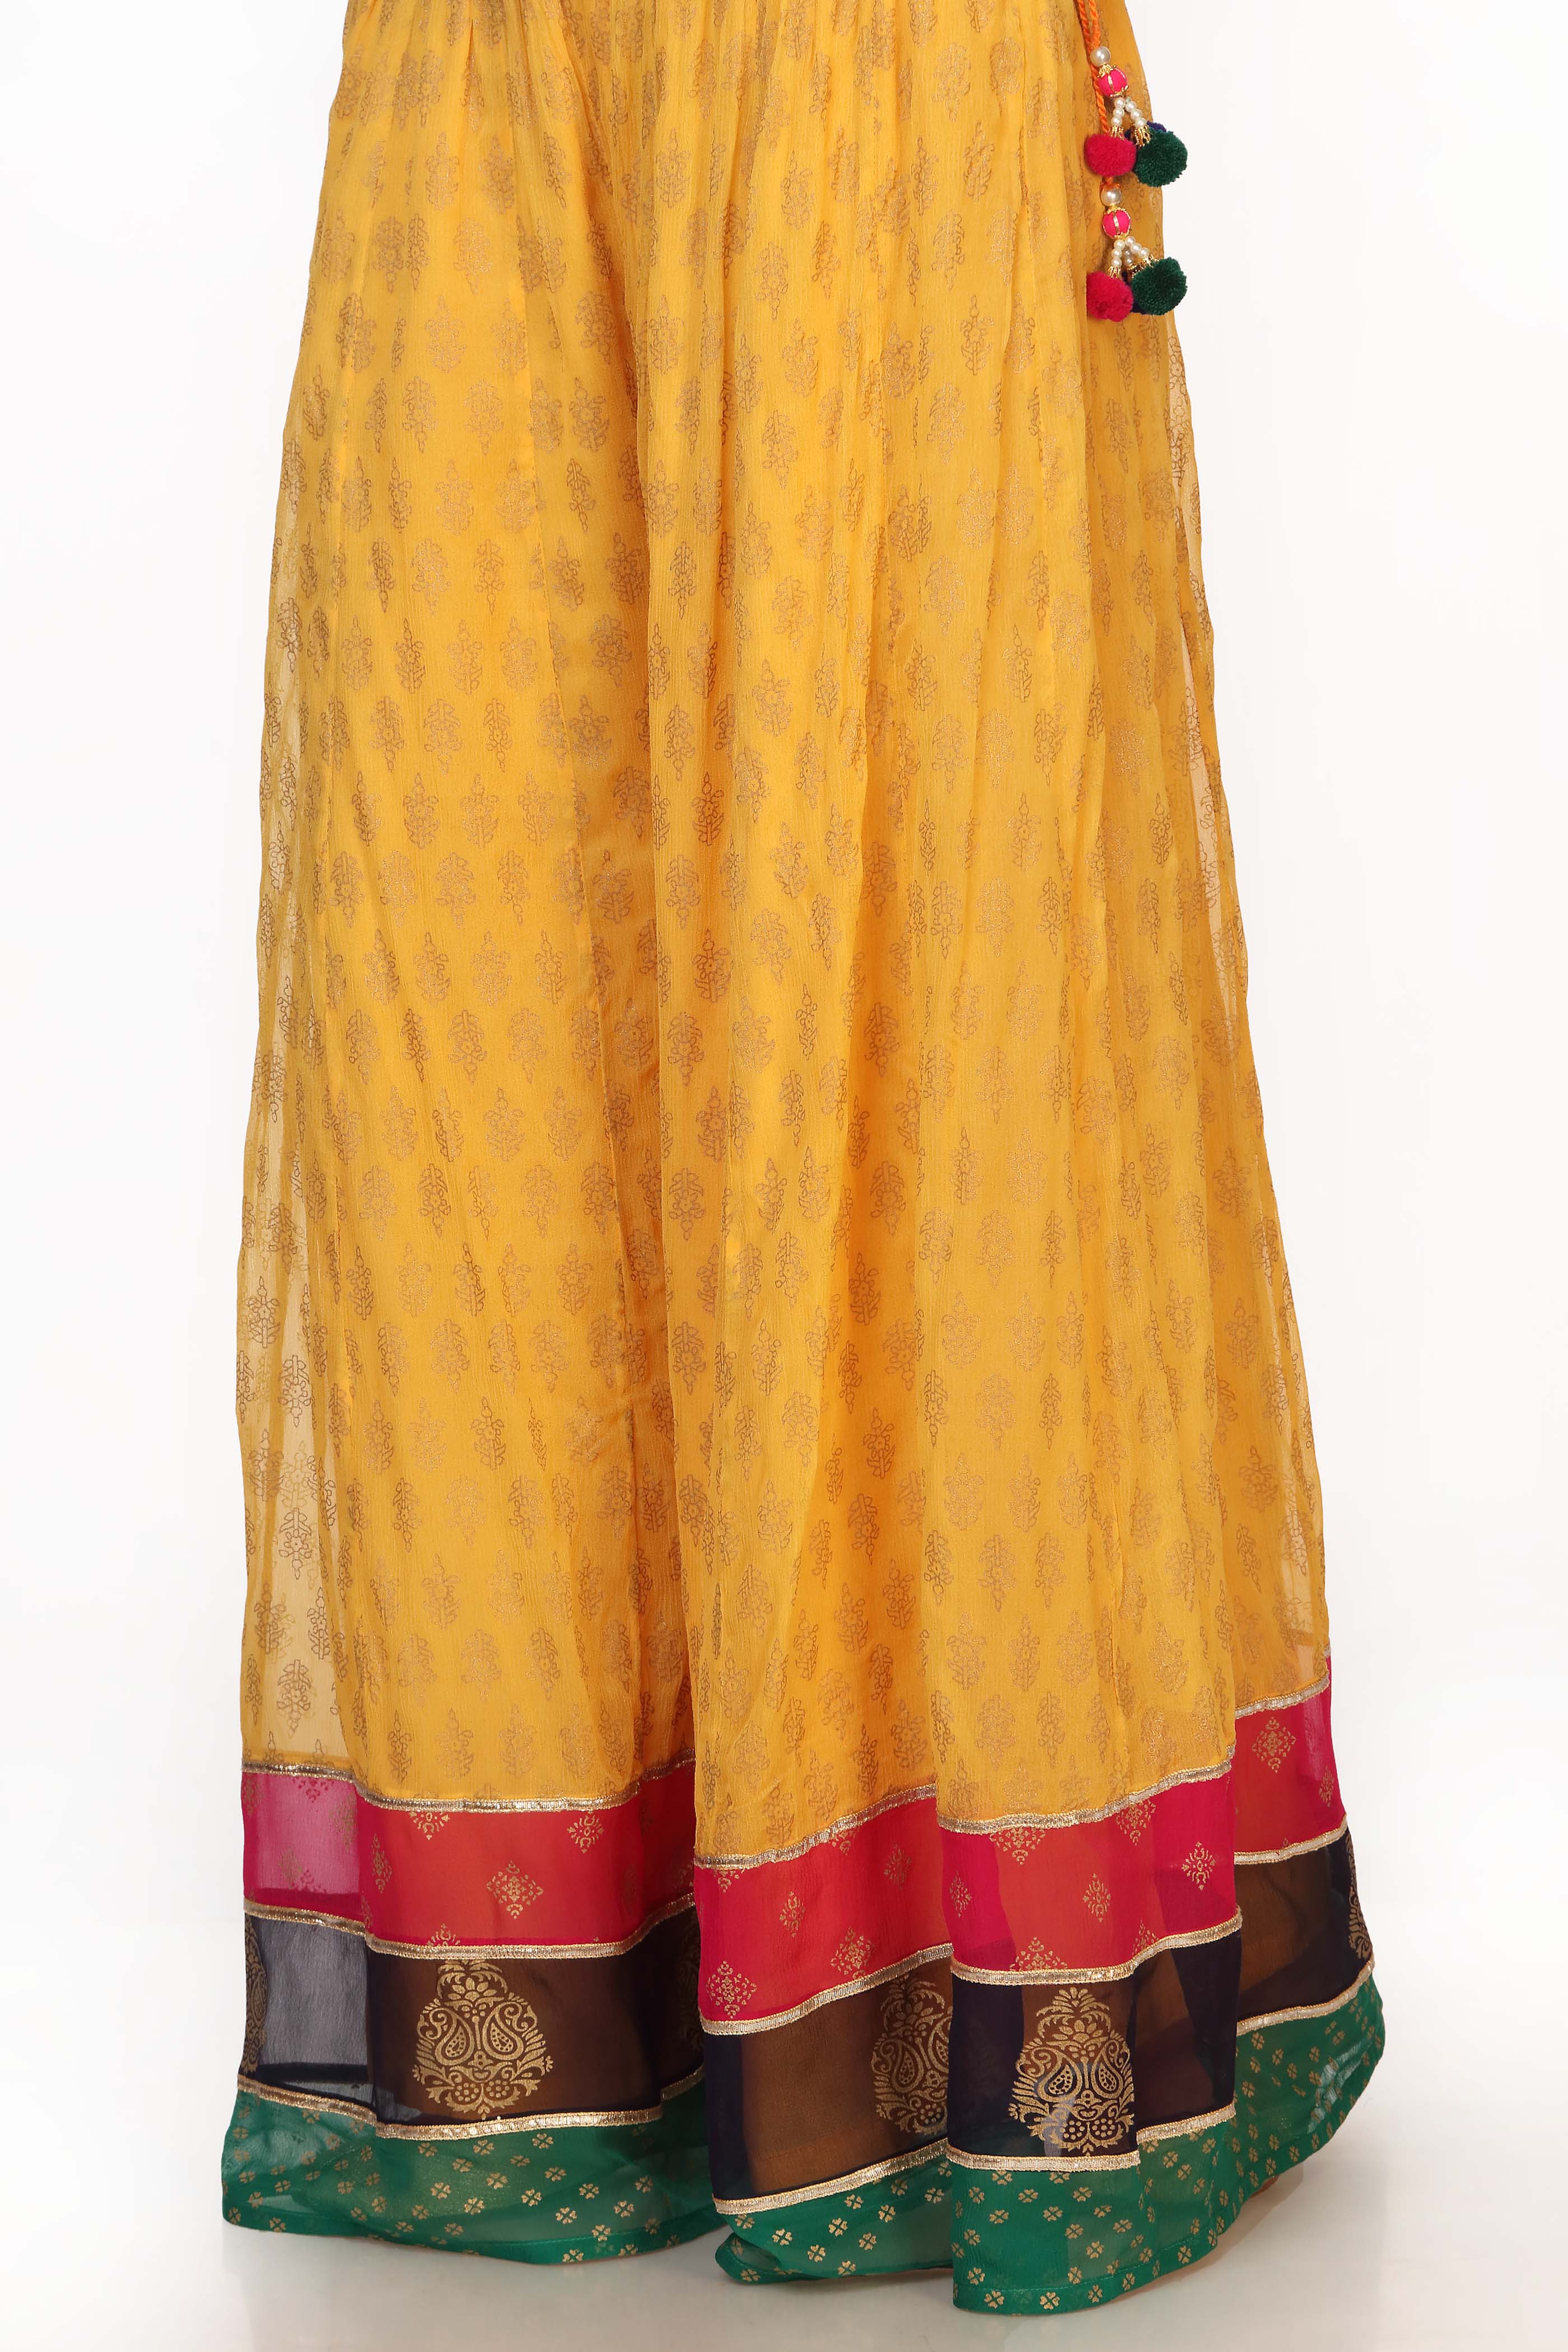 Multi Hues 1 in Yellow coloured Printed Lawn fabric 2